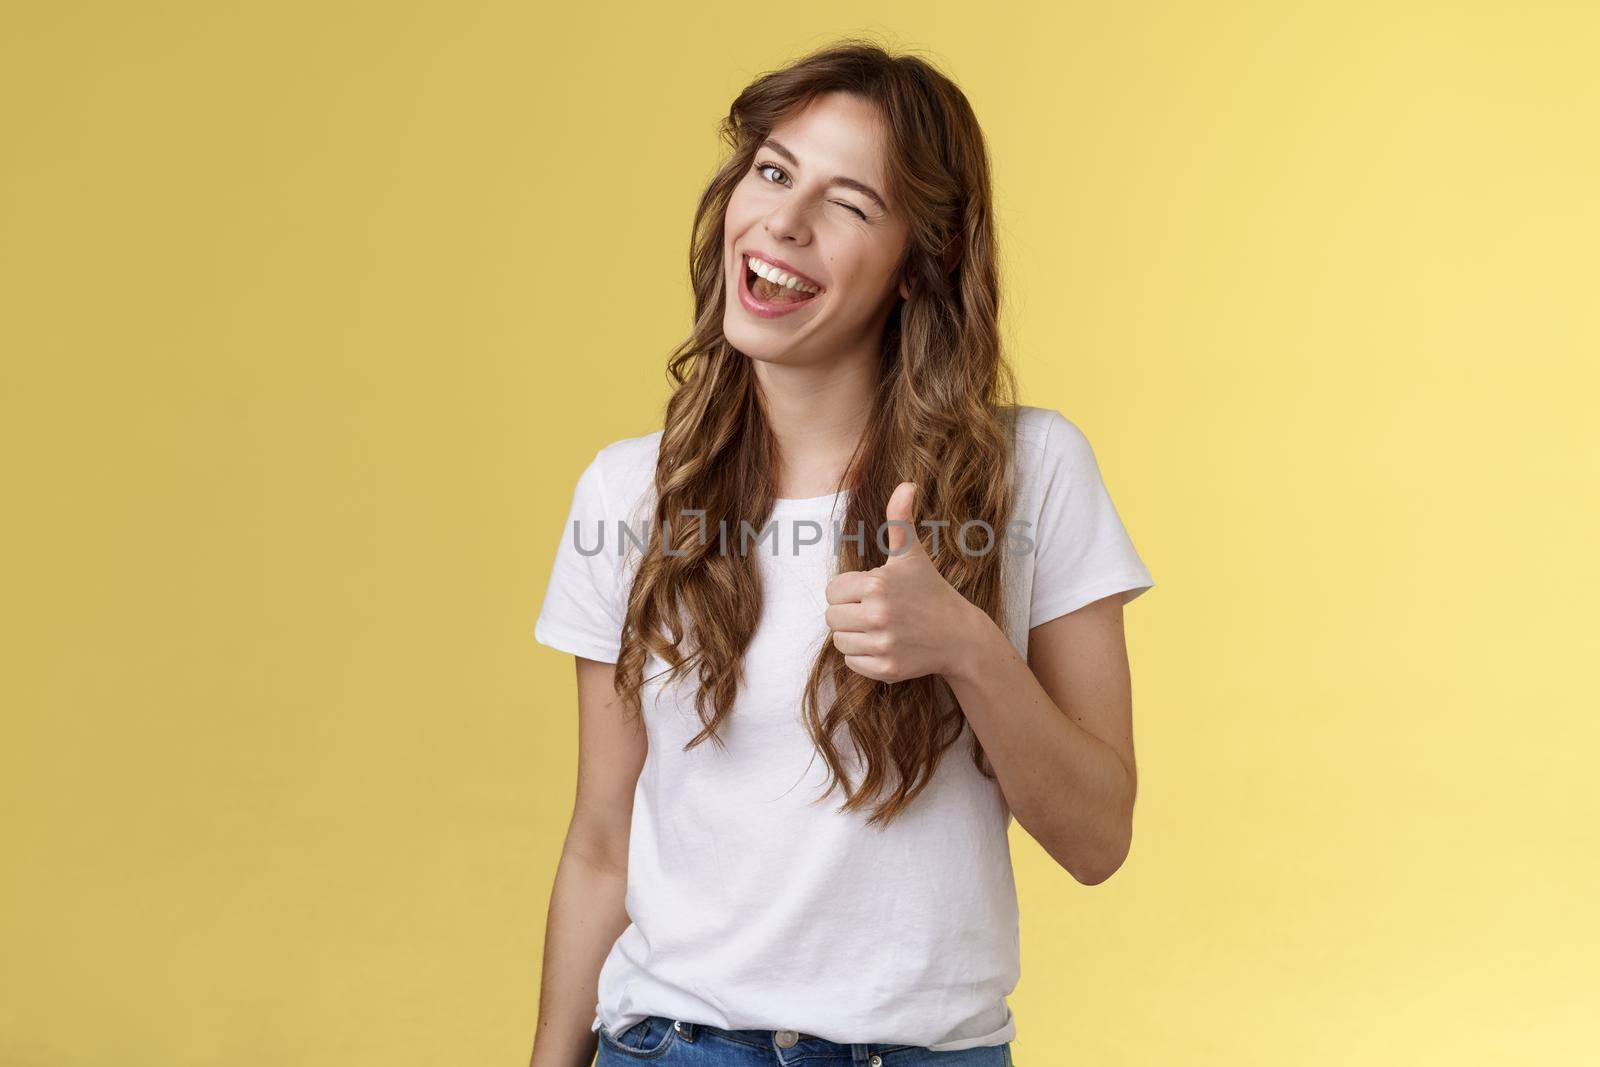 Nice well done mate. Cheerful outgoing cheeky attractive curly-haired female wink smiling nod approval show thumbs up like your choice good job accept terms stand yellow background.